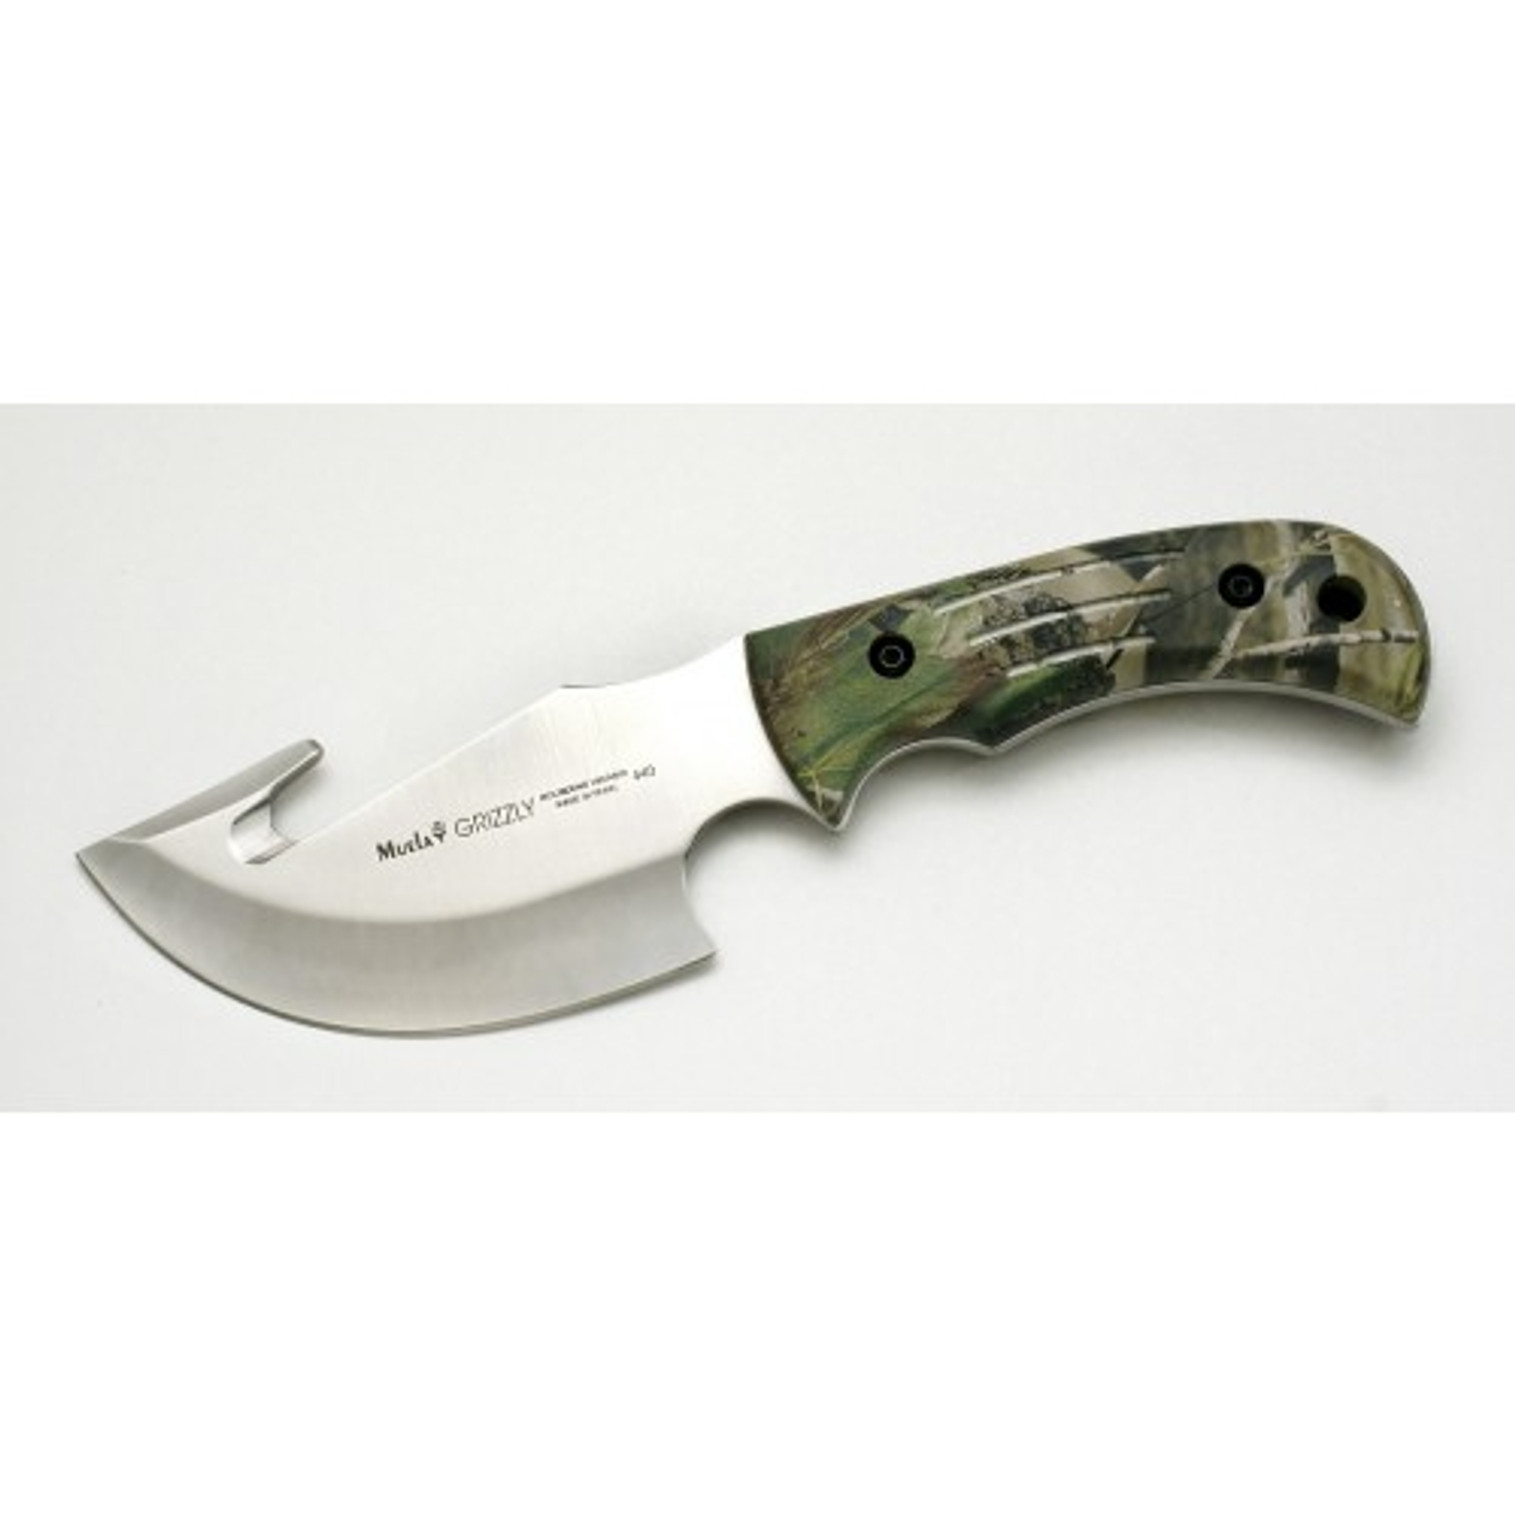 MUELA GRIZZLY-12AP, X50CrMoV15, 4-7/8" Fixed Blade Skinning Knife,  Realtree®APG™ Camouflage Handle